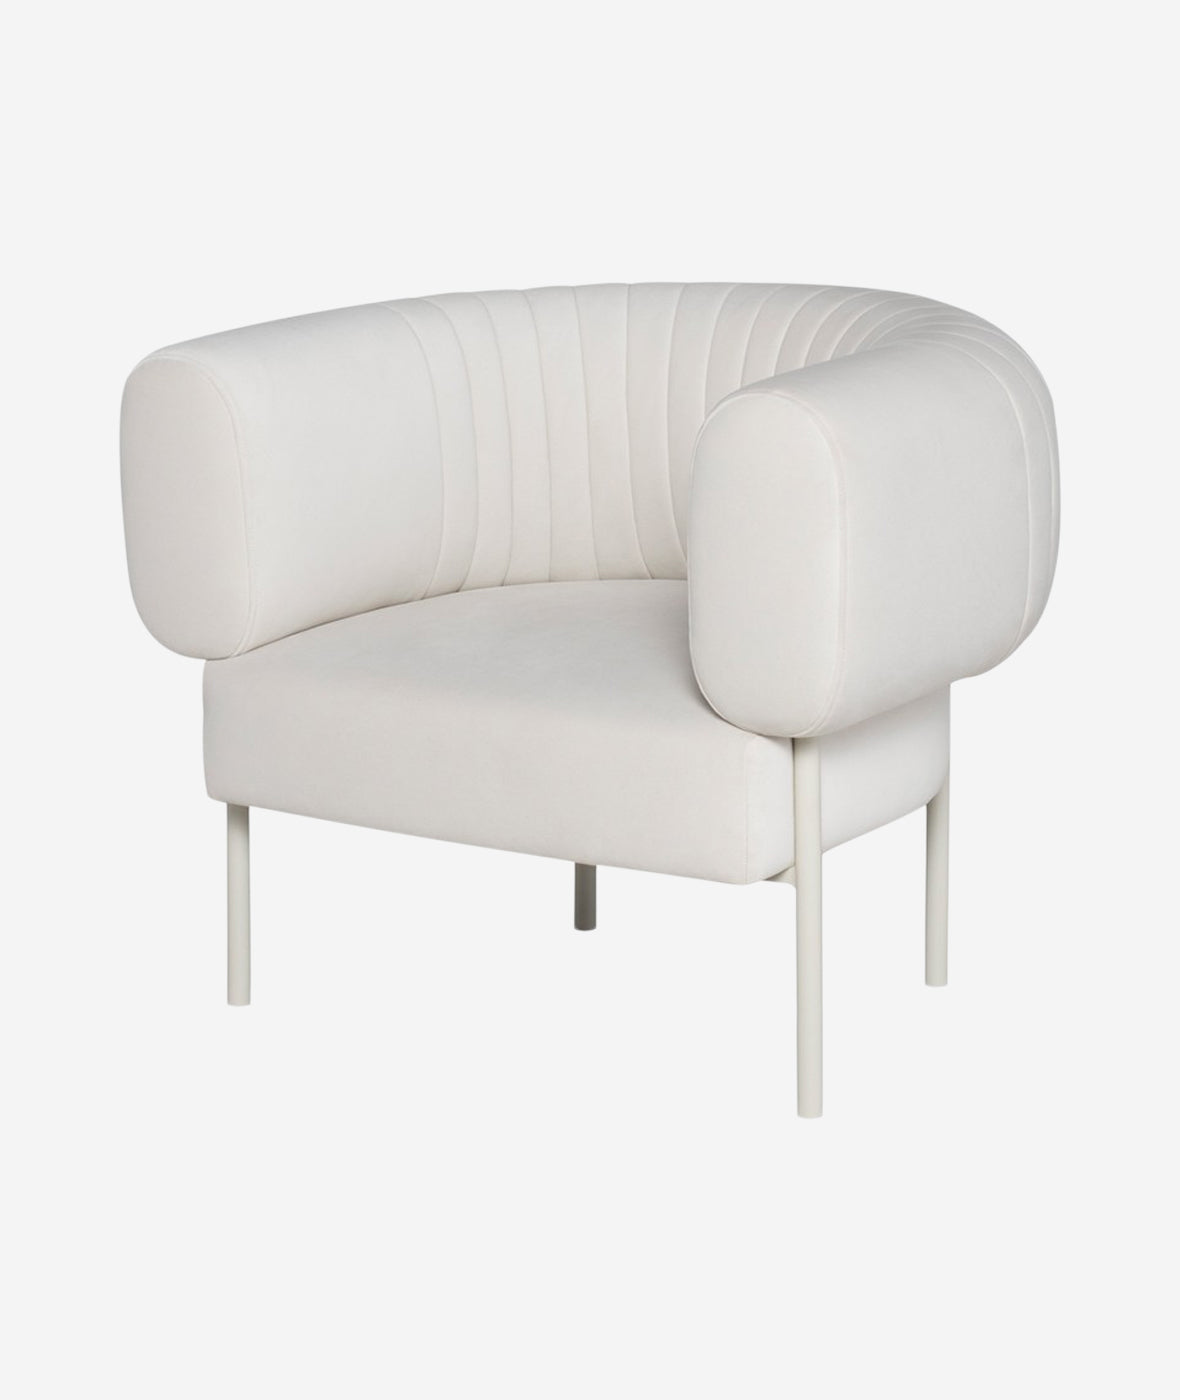 Reina Occasional Chair - More Options